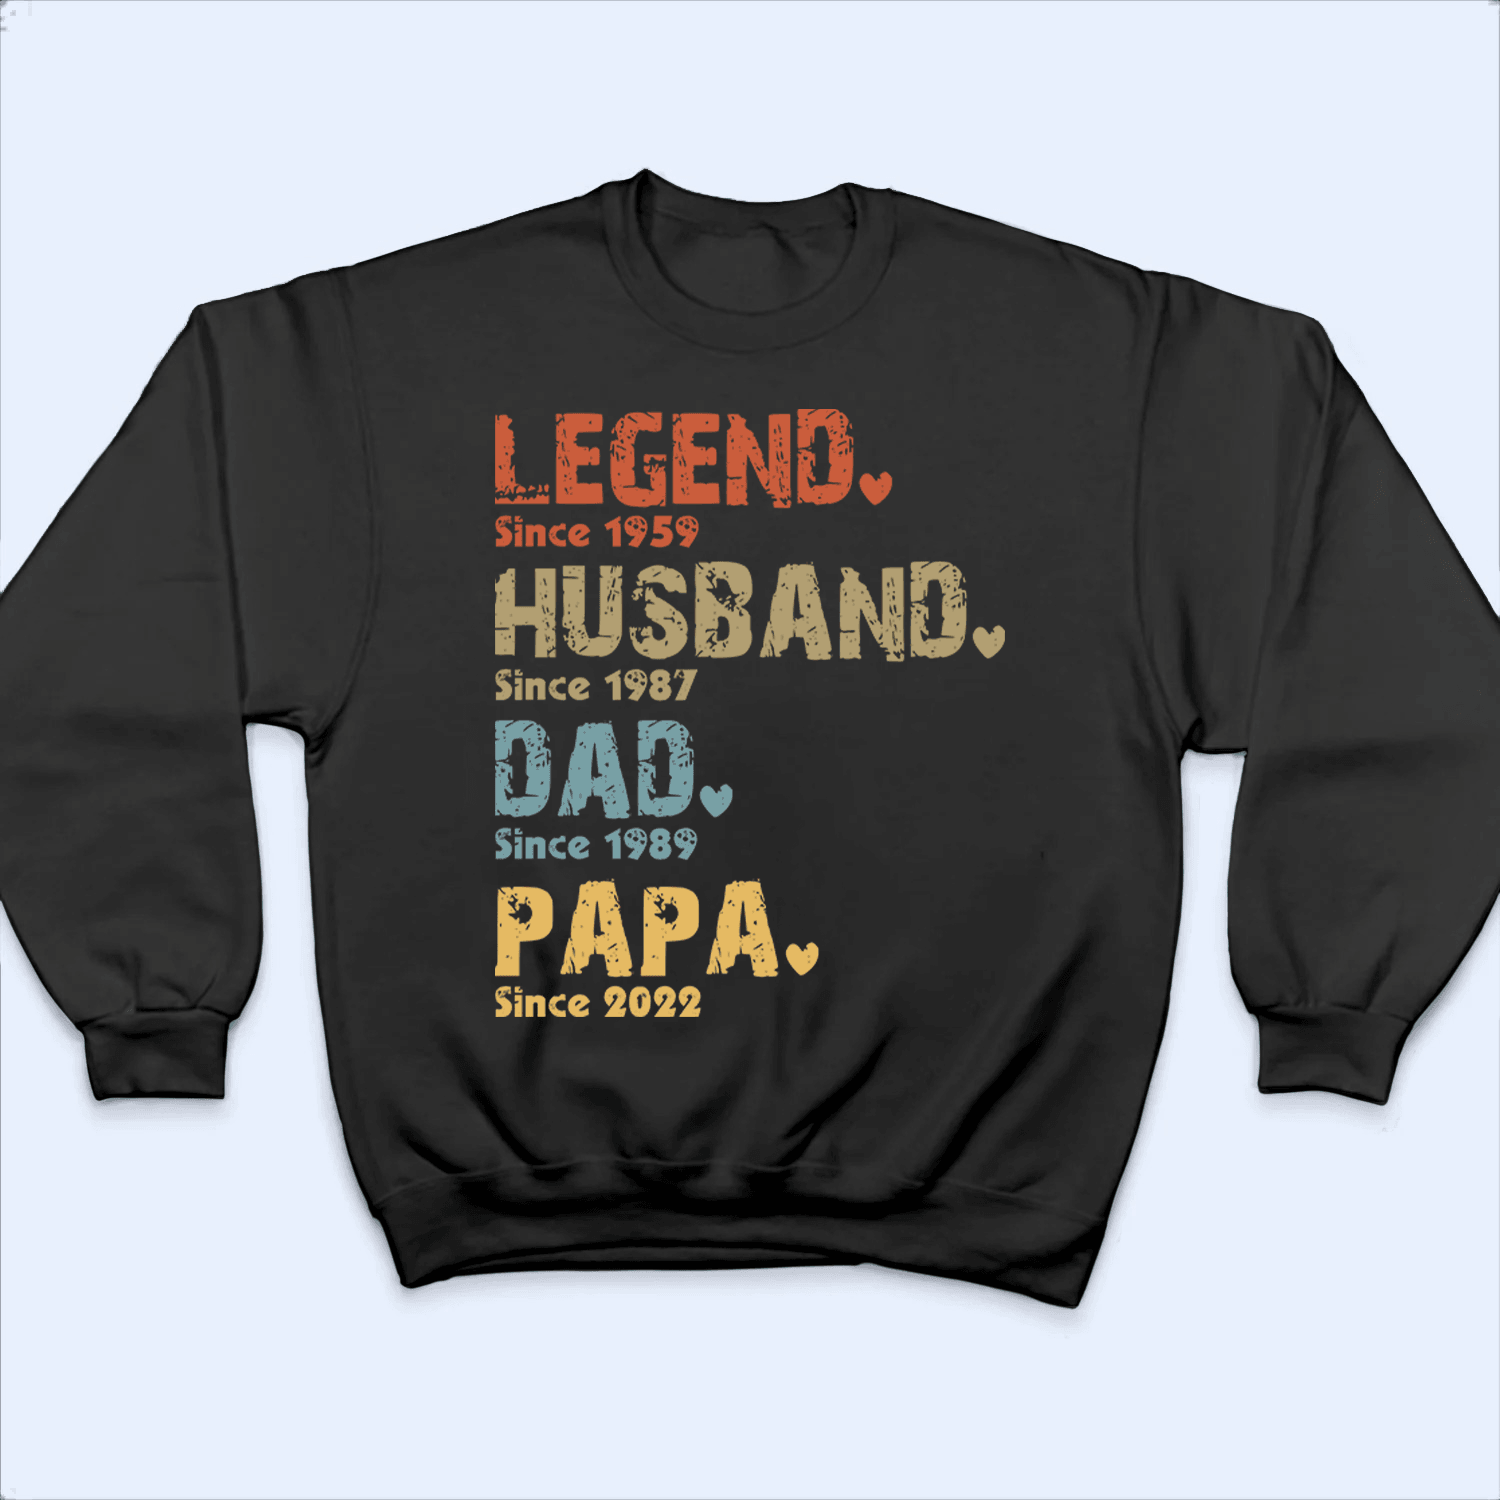 Legend, Husband, Dad, Grandpa: The Journey of a Lifetime - Personalized Custom Year T Shirt - Father's Day, Birthday Gift for Dad, Grandpa, Husband, Daddy, Dada, Papa, Dad Jokes